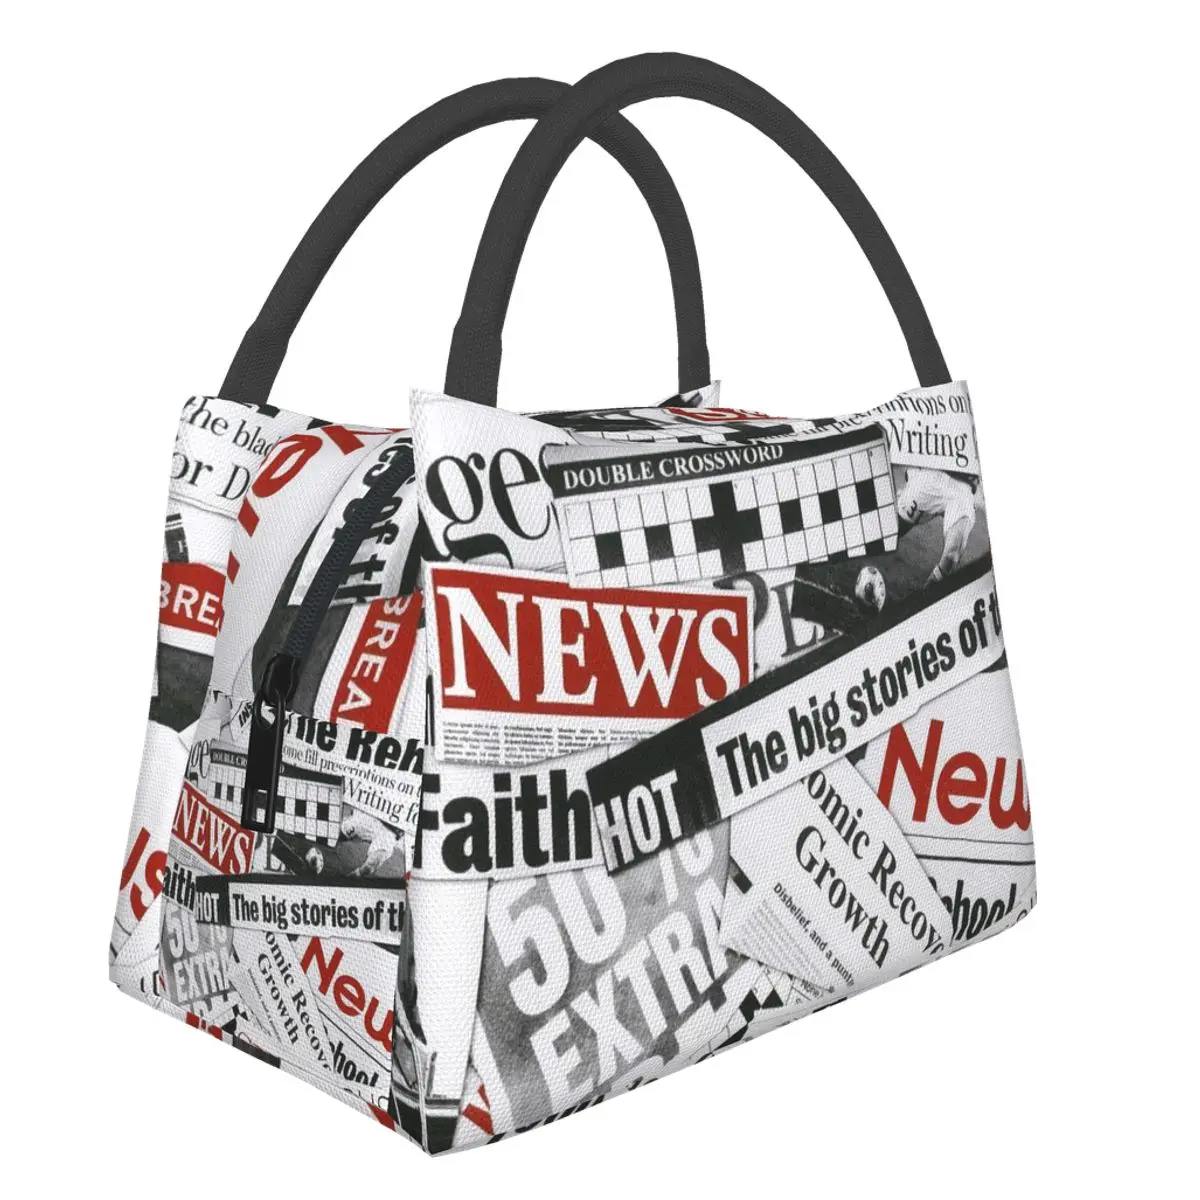 Portable Lunch Bag Newspaper Pattern Print Thermal Insulated Lunch Box Tote Cooler Handbag Bento Dinner Container School Storage insulated lunch bag portable thermal lunch box tote women kids cooler picnic food fresh handbag dinner container accessories